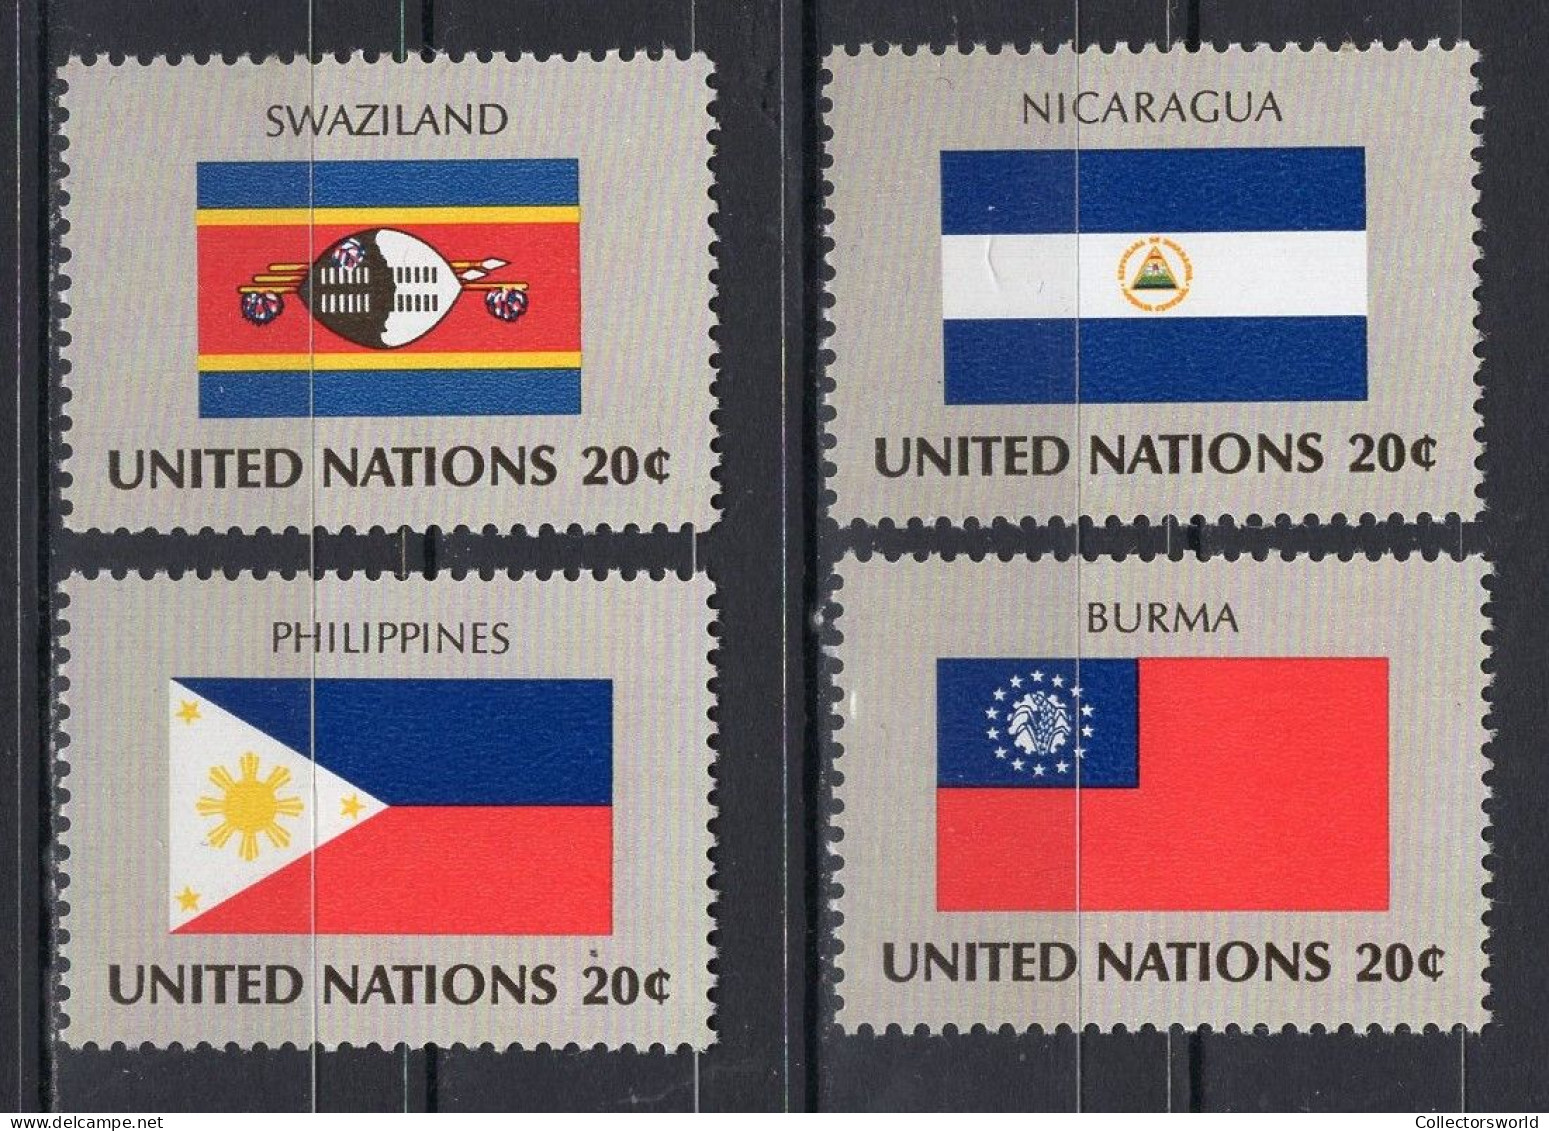 United Nations UN New York Serie 4v 1982 Flag Serie Philippines Swaziland Nicaragua MNH - Nuovi